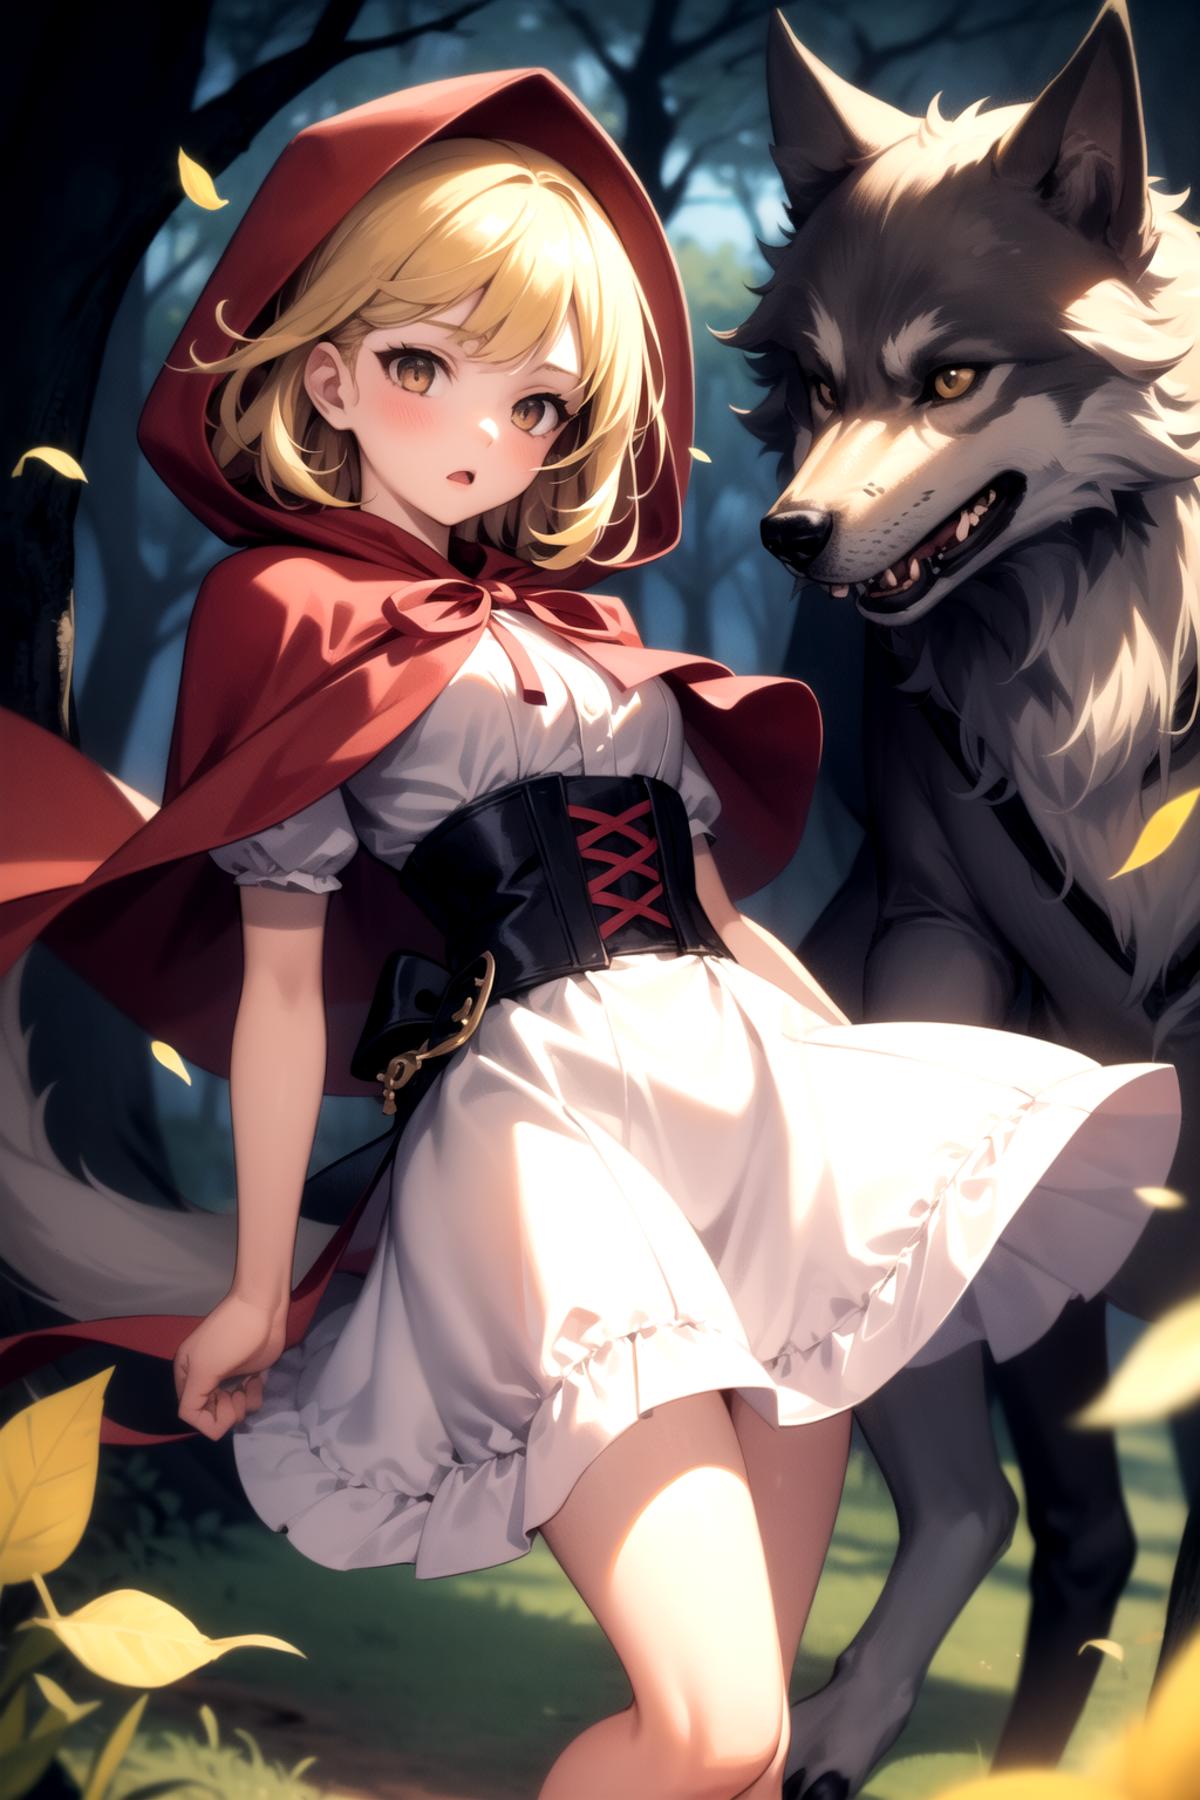 Anime girl wearing a white dress and red cape with a wolf behind her.